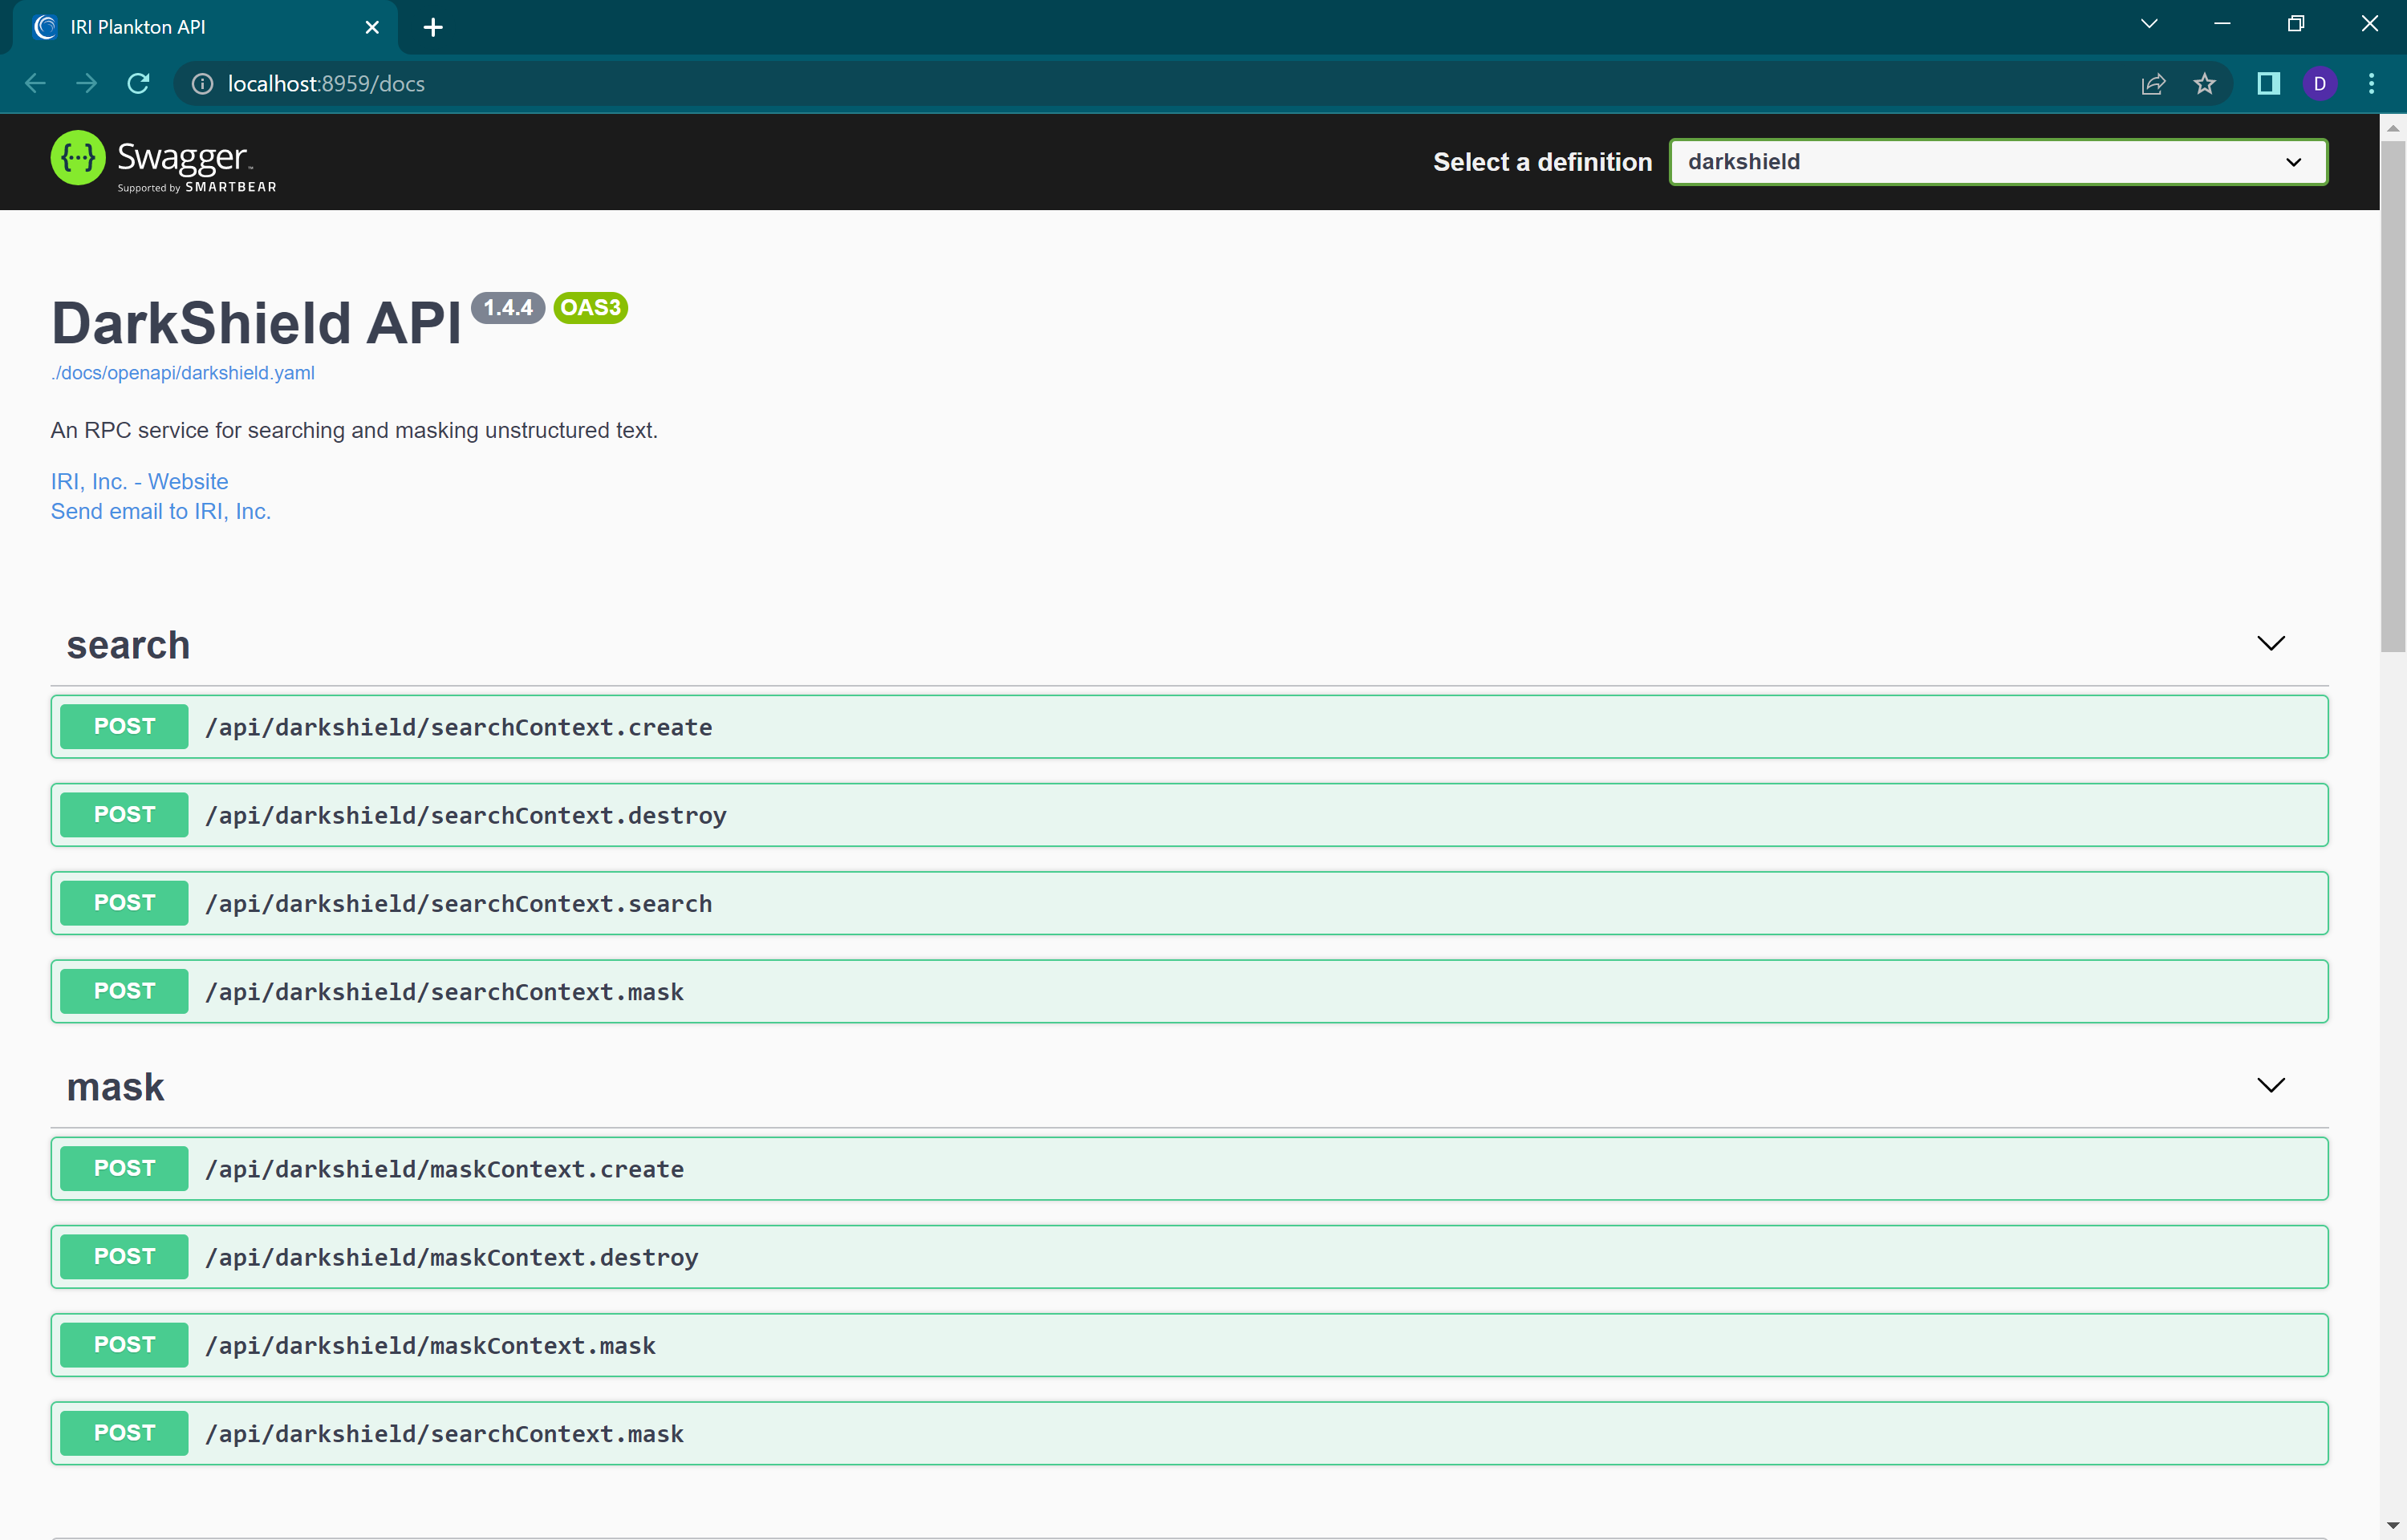 This image shows base endpoints of the DarkShield API for searching and masking text